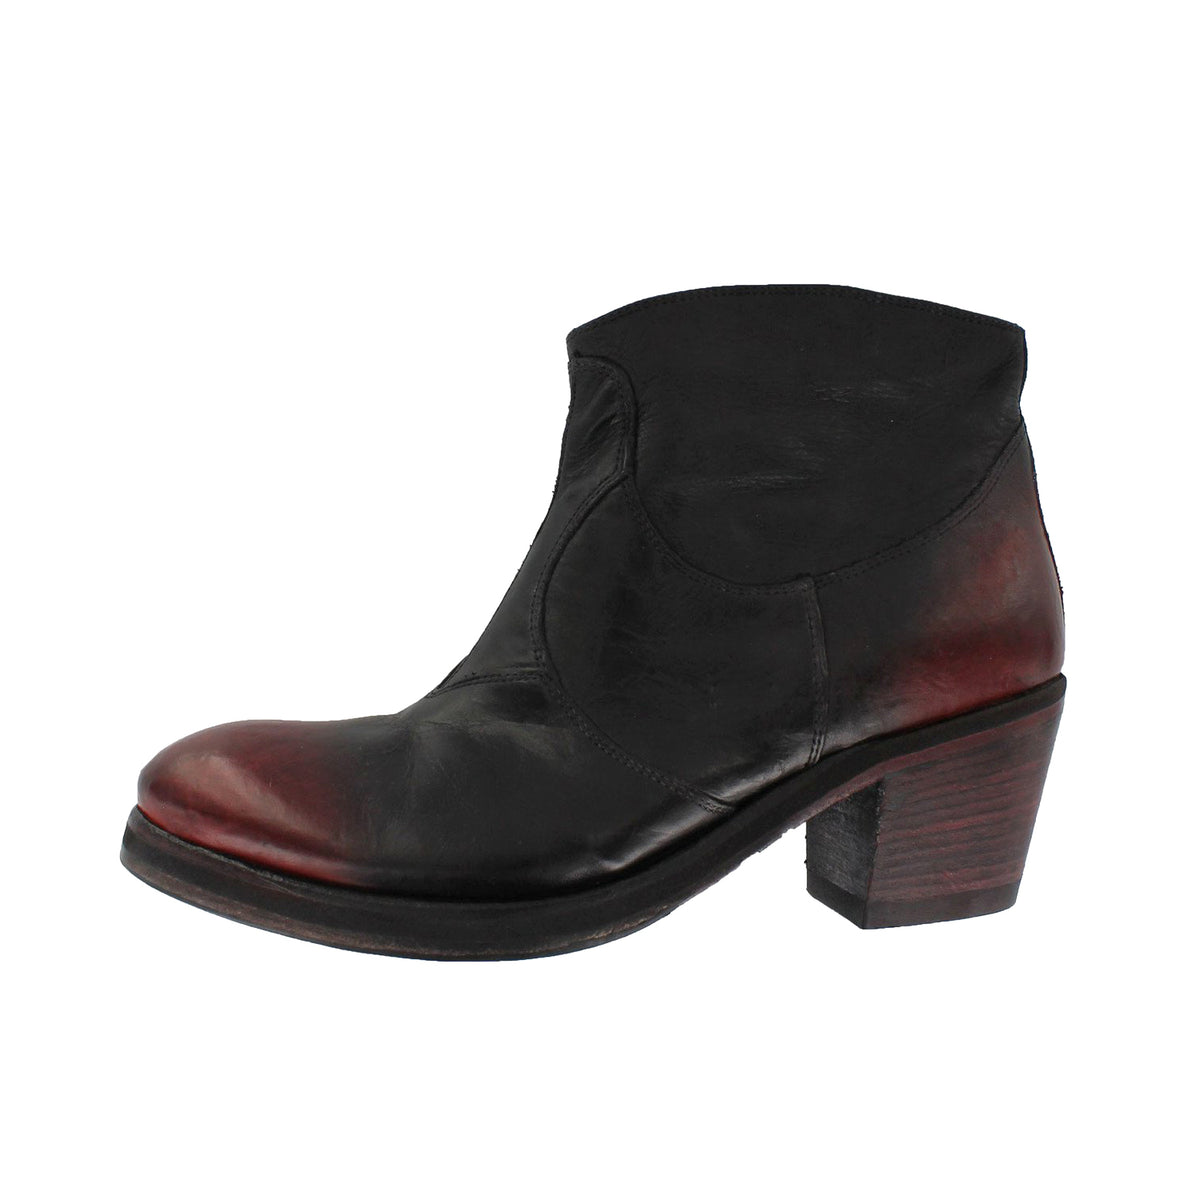 TaniaB - Black Ankle Boot With Cherry Red Toe Cap